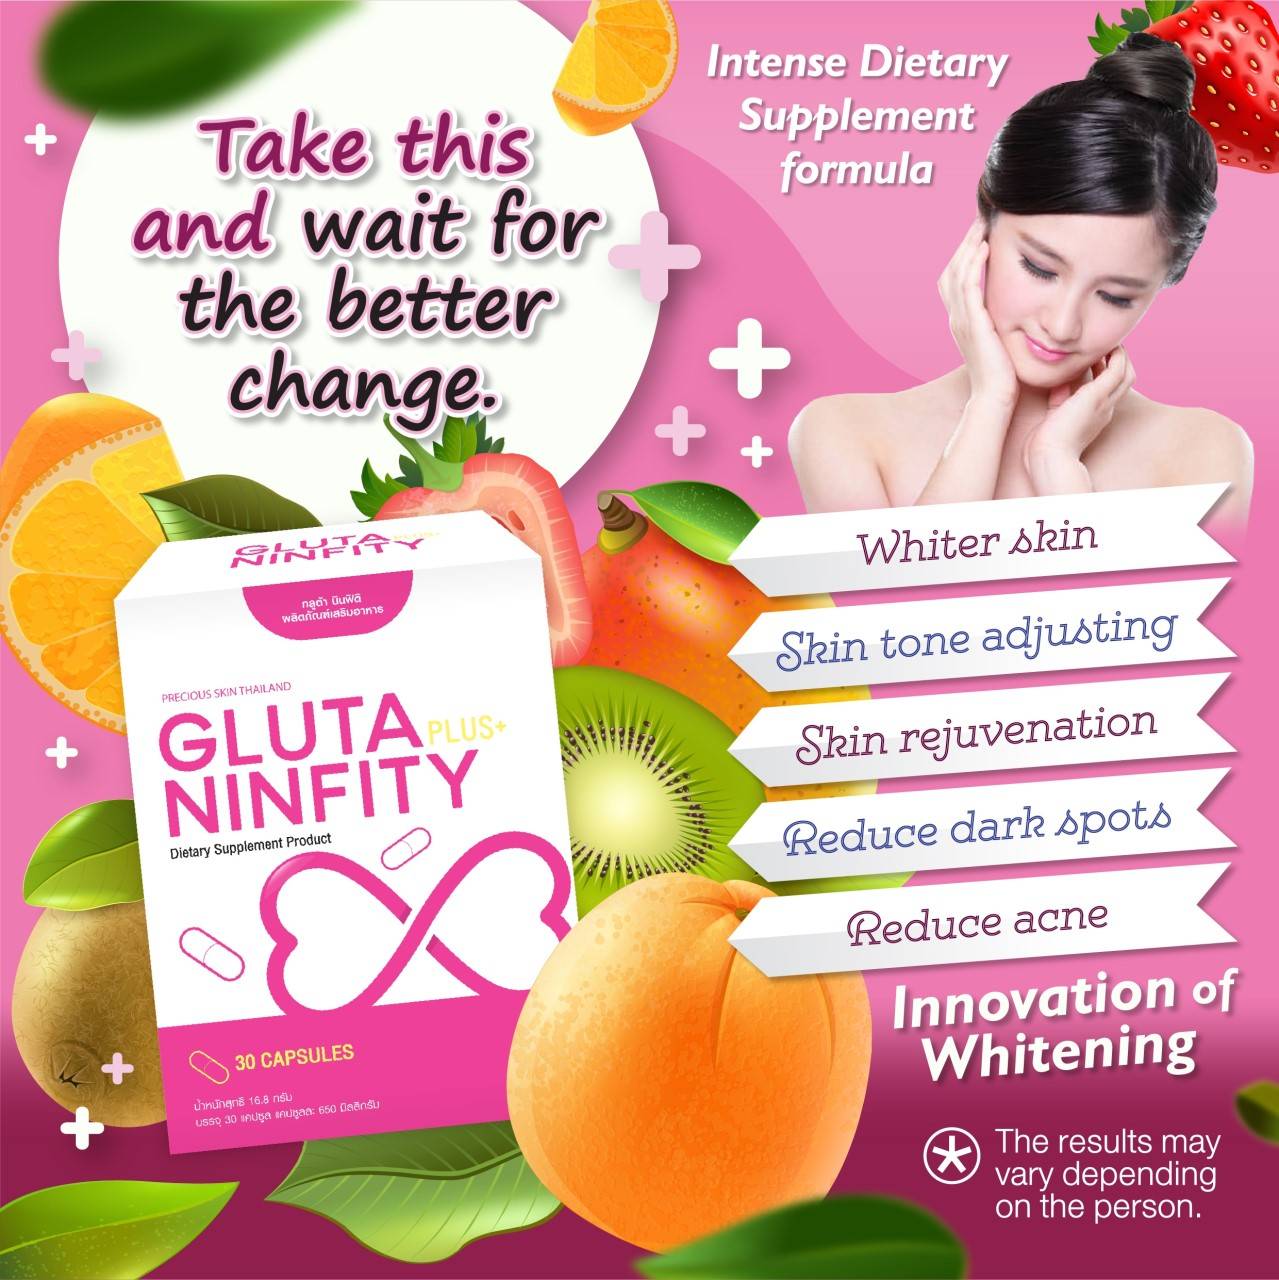 NEW GLUTA NINFITY PLUS+ 900,000 mg (NANO PLUS+) WHITE COLLAGEN Q10 ANTI-AGING AND V-SHAPE FACE STRAWBERRY EXTRACT WHITENING by "www.ccthaitown.com"